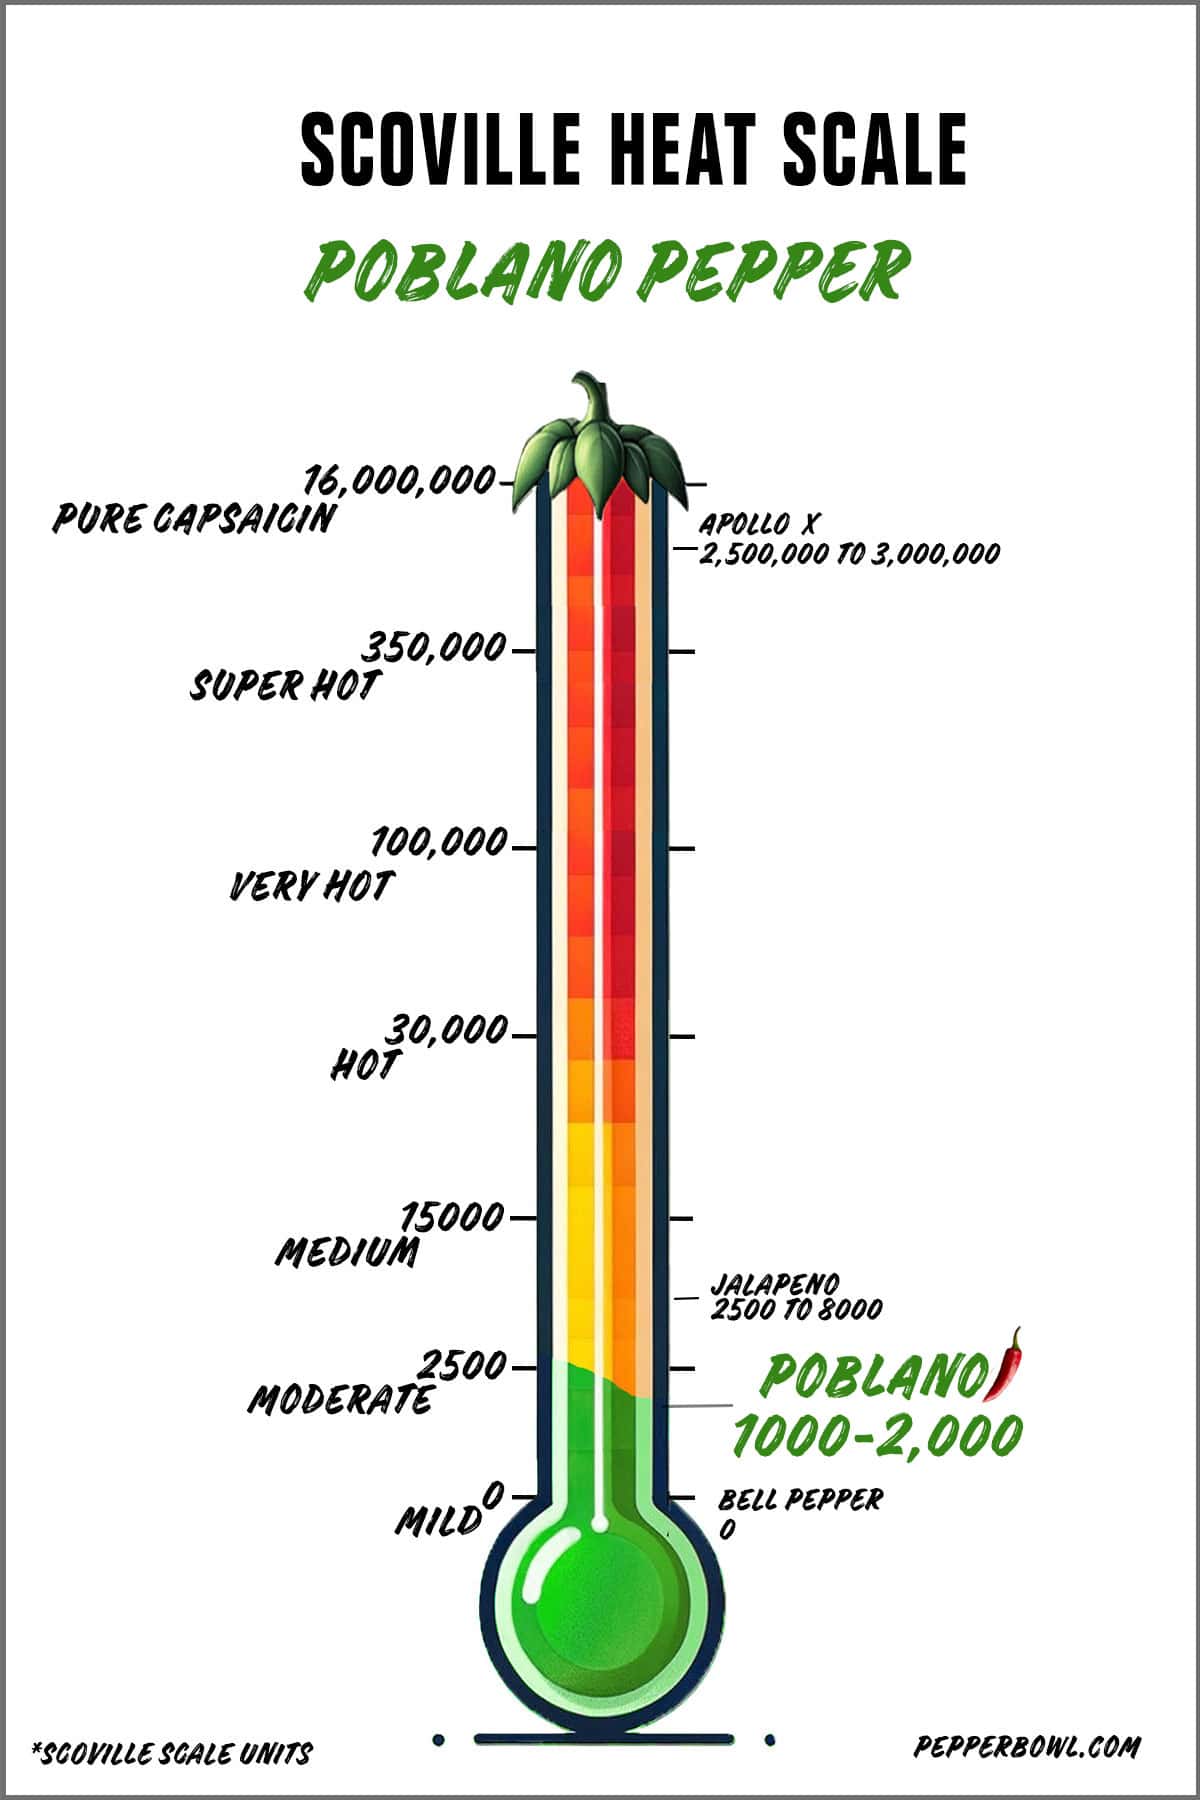 Illustration of the poblana pepper in the Scoville scale, representing its moderate level of heat intensity.